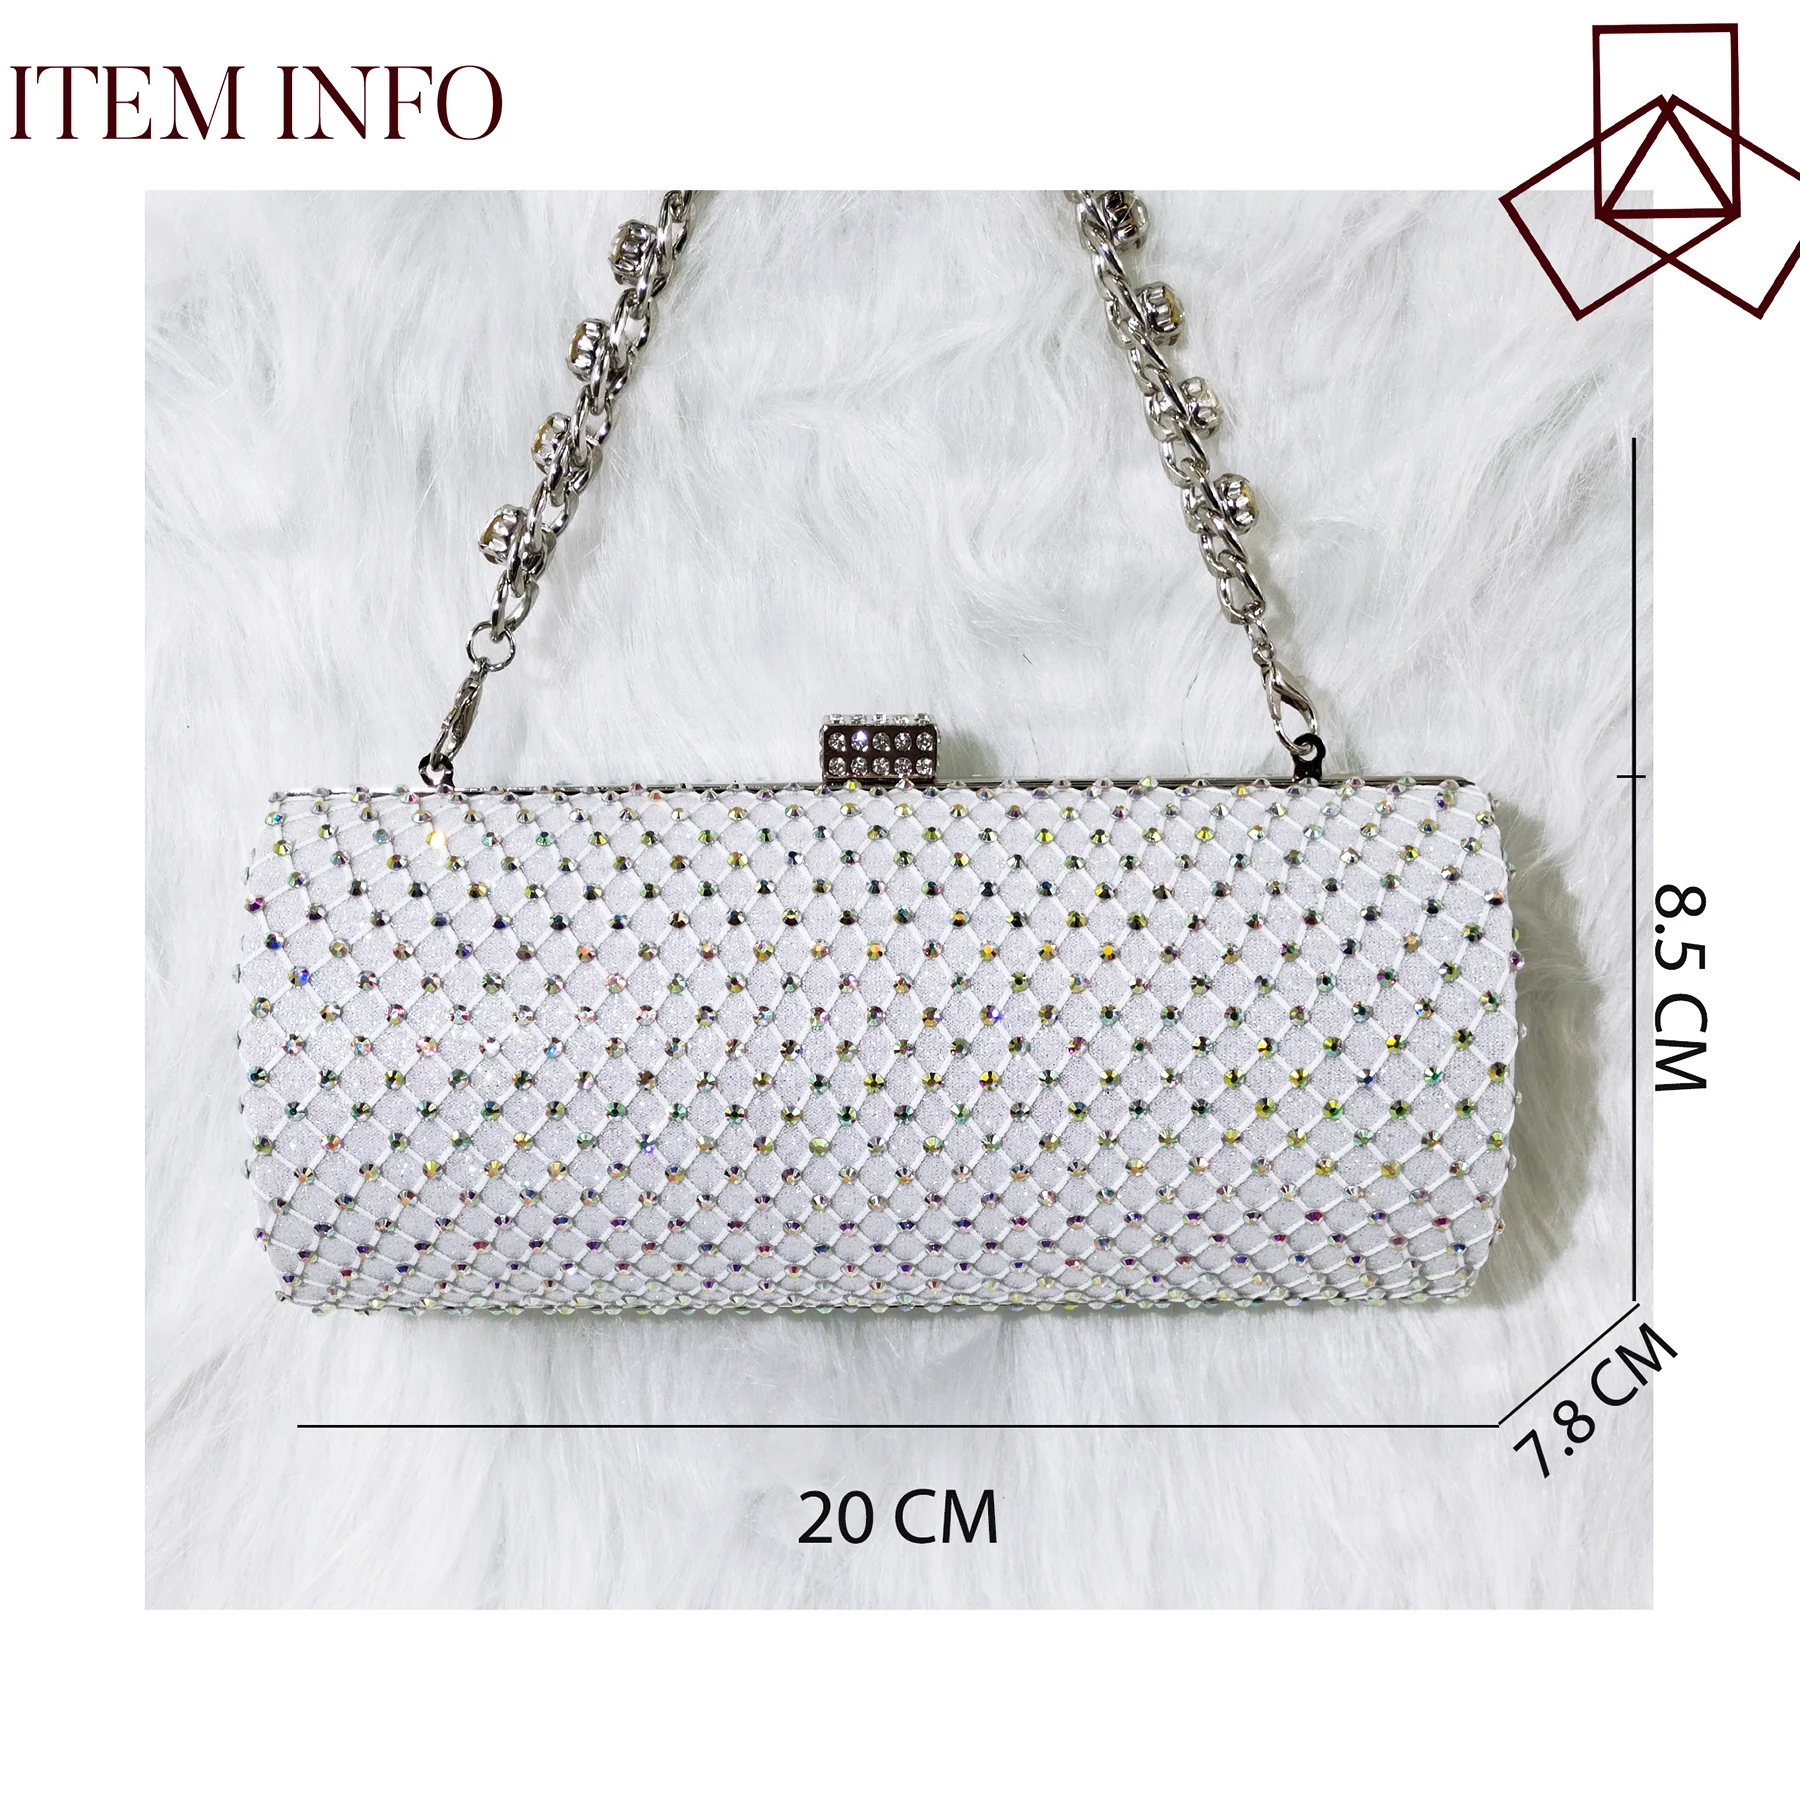 

QSGFC White Color Crystal Mesh Round Hard Bag Evening Clutch Girly Fashion Small Bag Long Shoulder Strap Two-Way Bag